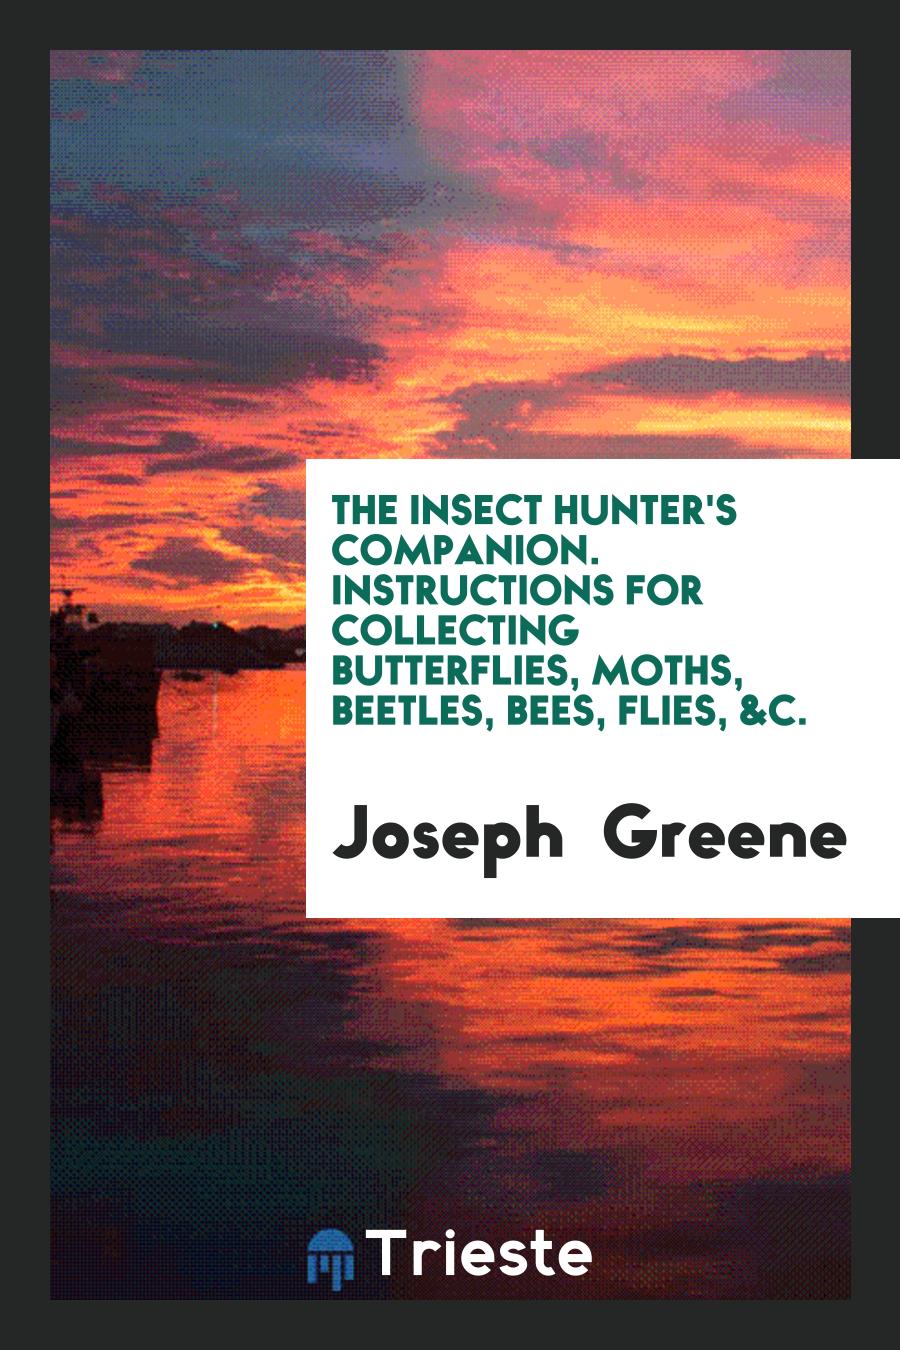 The Insect Hunter's Companion. Instructions for Collecting Butterflies, Moths, Beetles, Bees, Flies, &C.